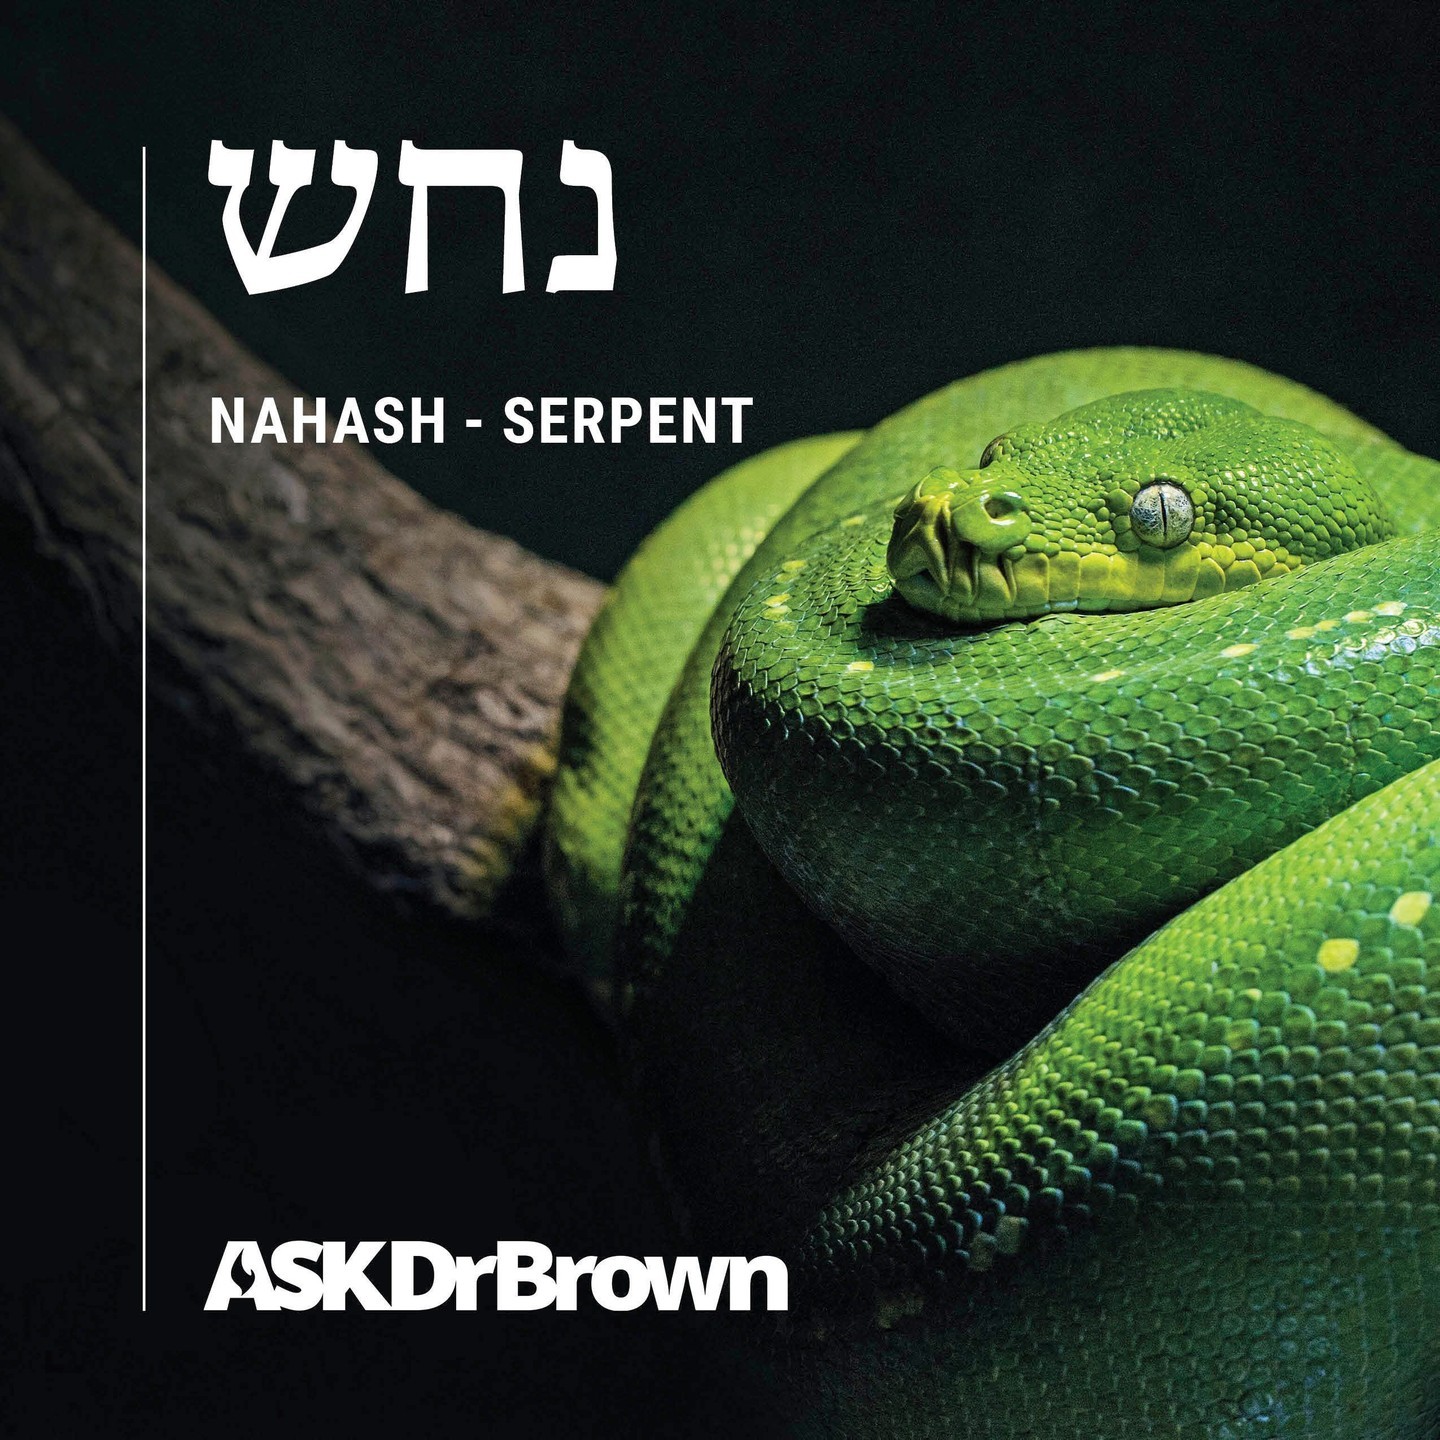 “Now the serpent was more crafty than any of the wild animals the Lord God had made. He said to the woman, ‘Did God really say, ‘You must not eat from any tree in the garden’?’.” Psalms 3:3#askdrbrown #hebrew #biblicallanguage #dailywisdom #dailybibleverse #dailyencouragement #GodsWord #verseoftheday